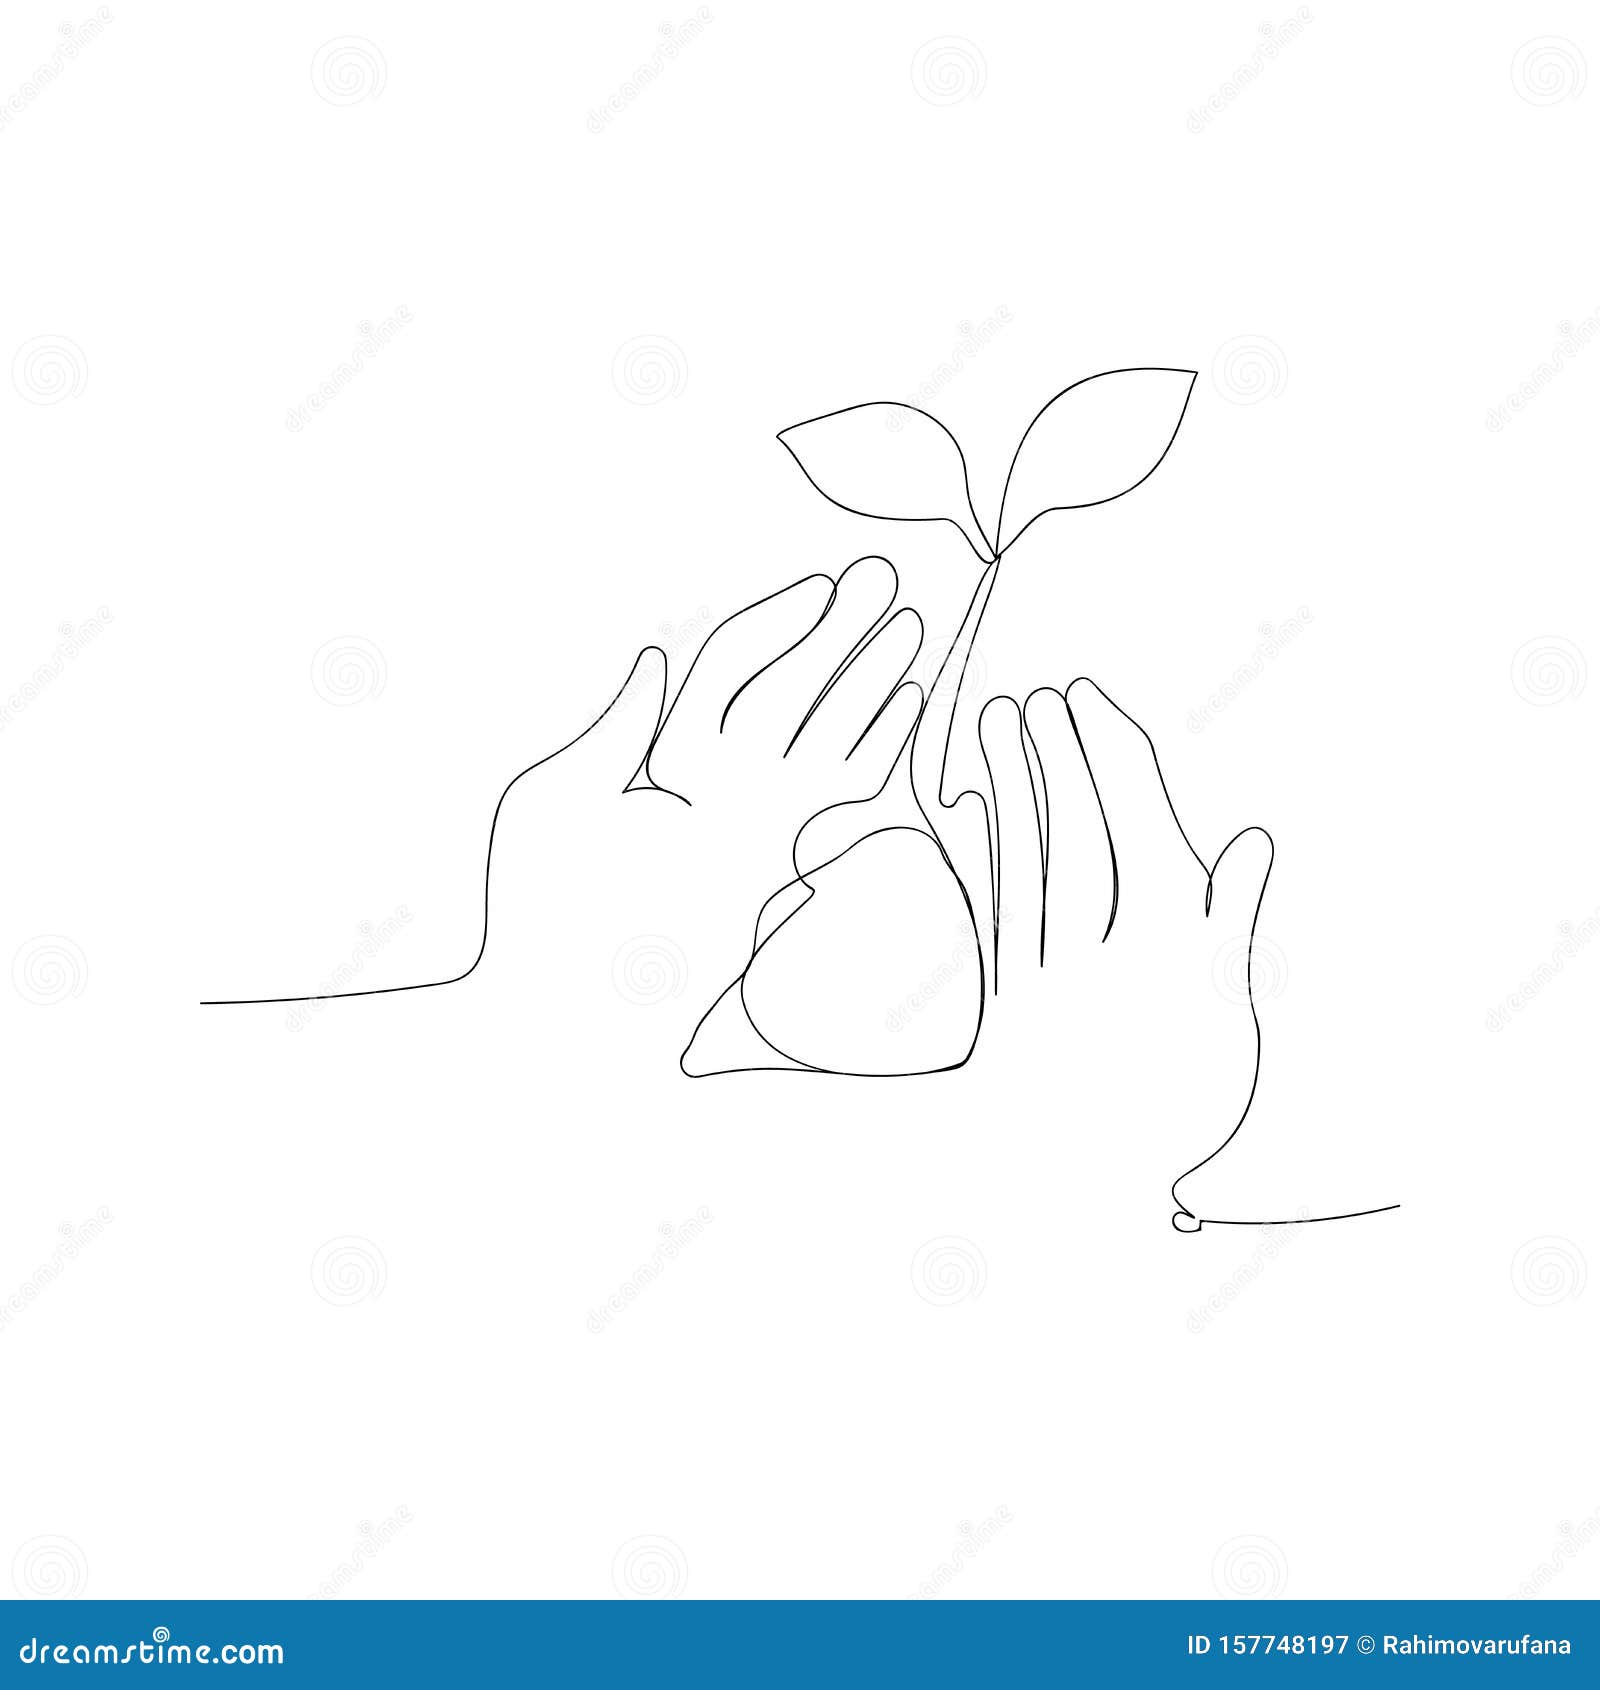 Illustration of hyacinth growth tree stage life sketch design element  Vector pattern of hand drawn drawing illustration of  CanStock